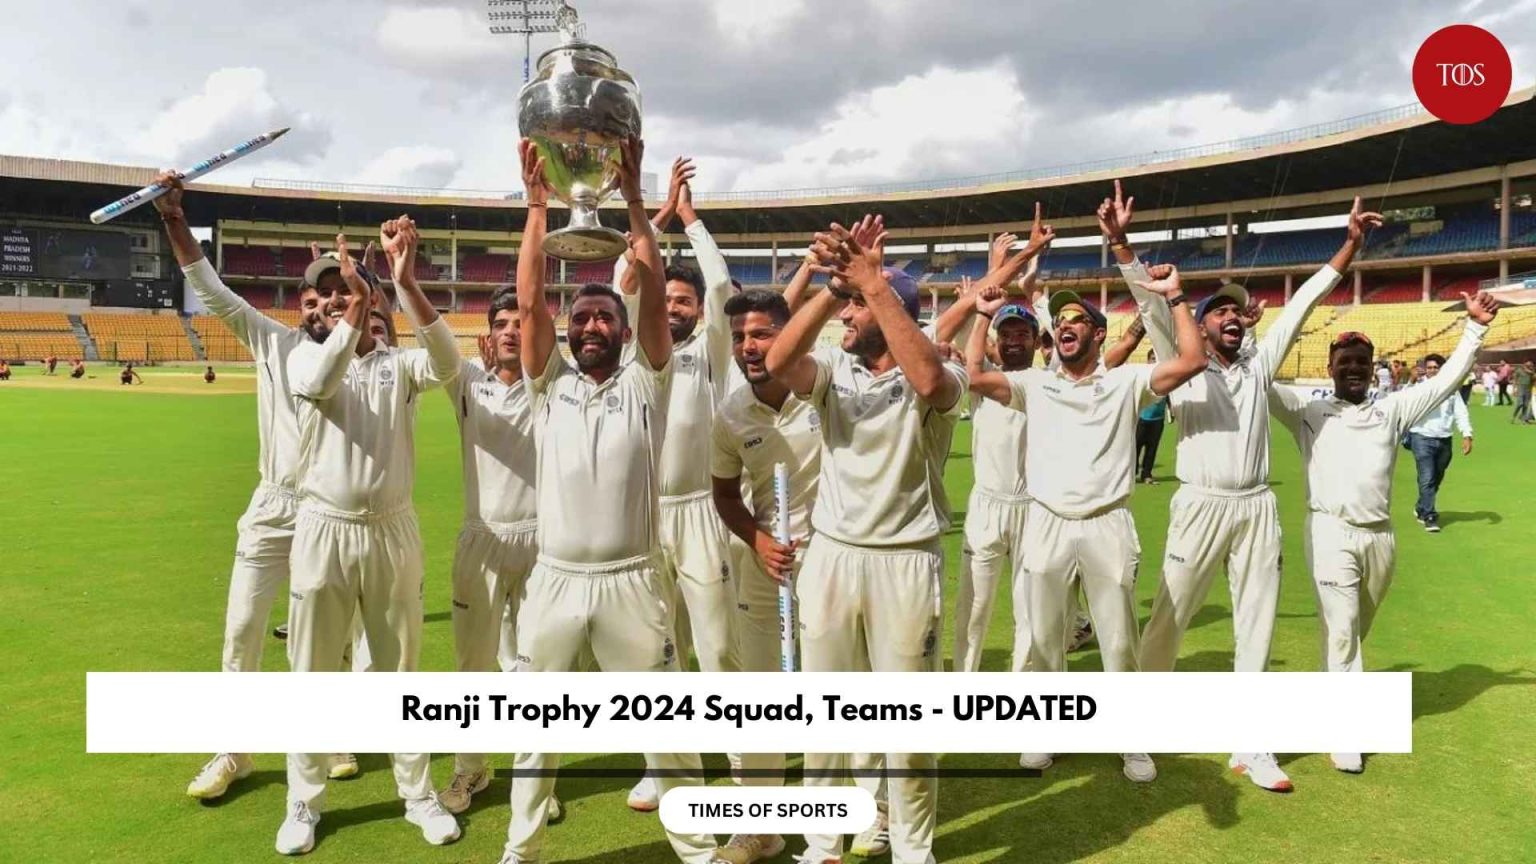 Ranji Trophy 2024 Squad, Teams UPDATED